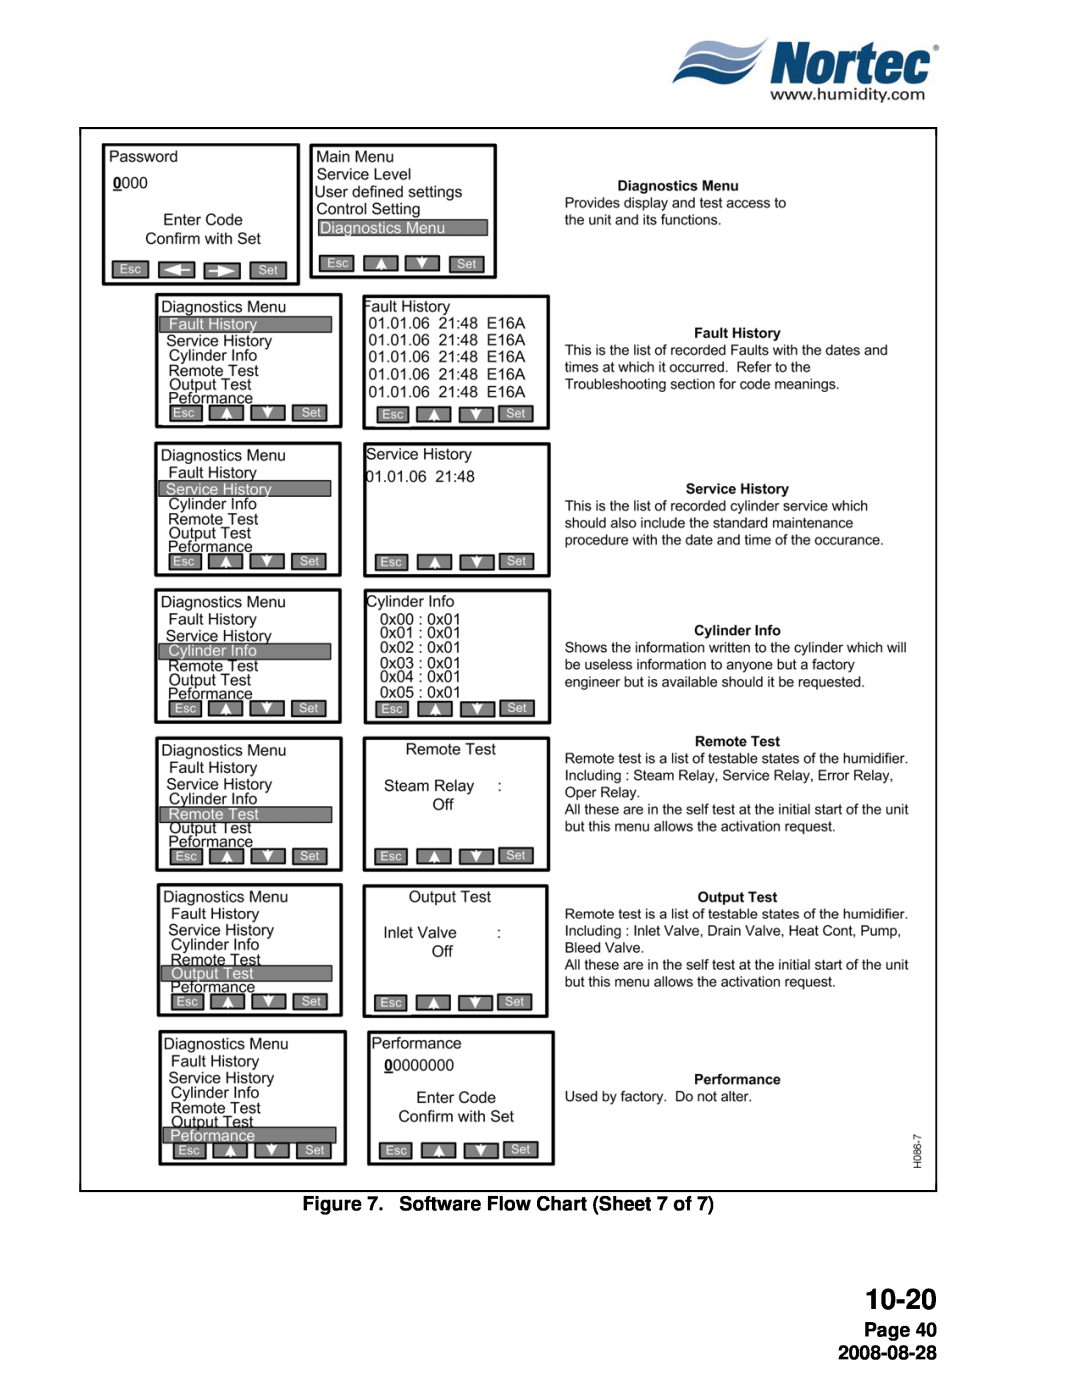 Nortec NH Series installation manual Software Flow Chart Sheet 7 of, Page 40, 10-20 